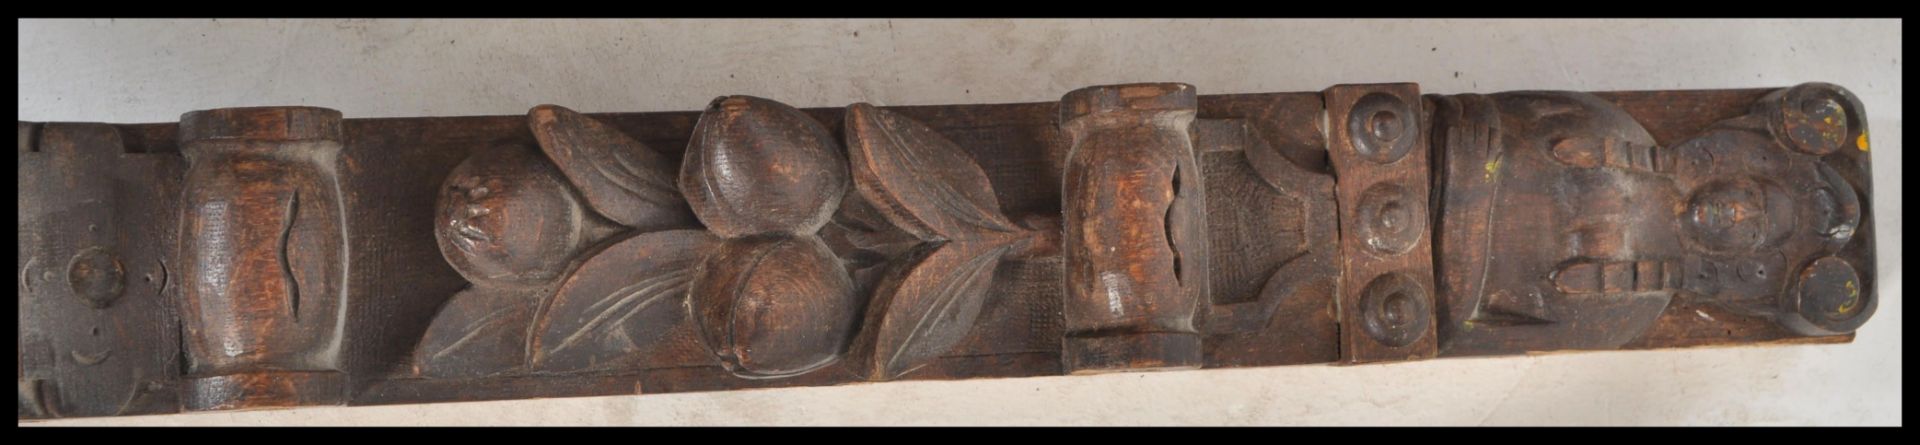 A selection of 20th Century carved oak wooden beams / blocks carved with patterned decoration - Bild 4 aus 5